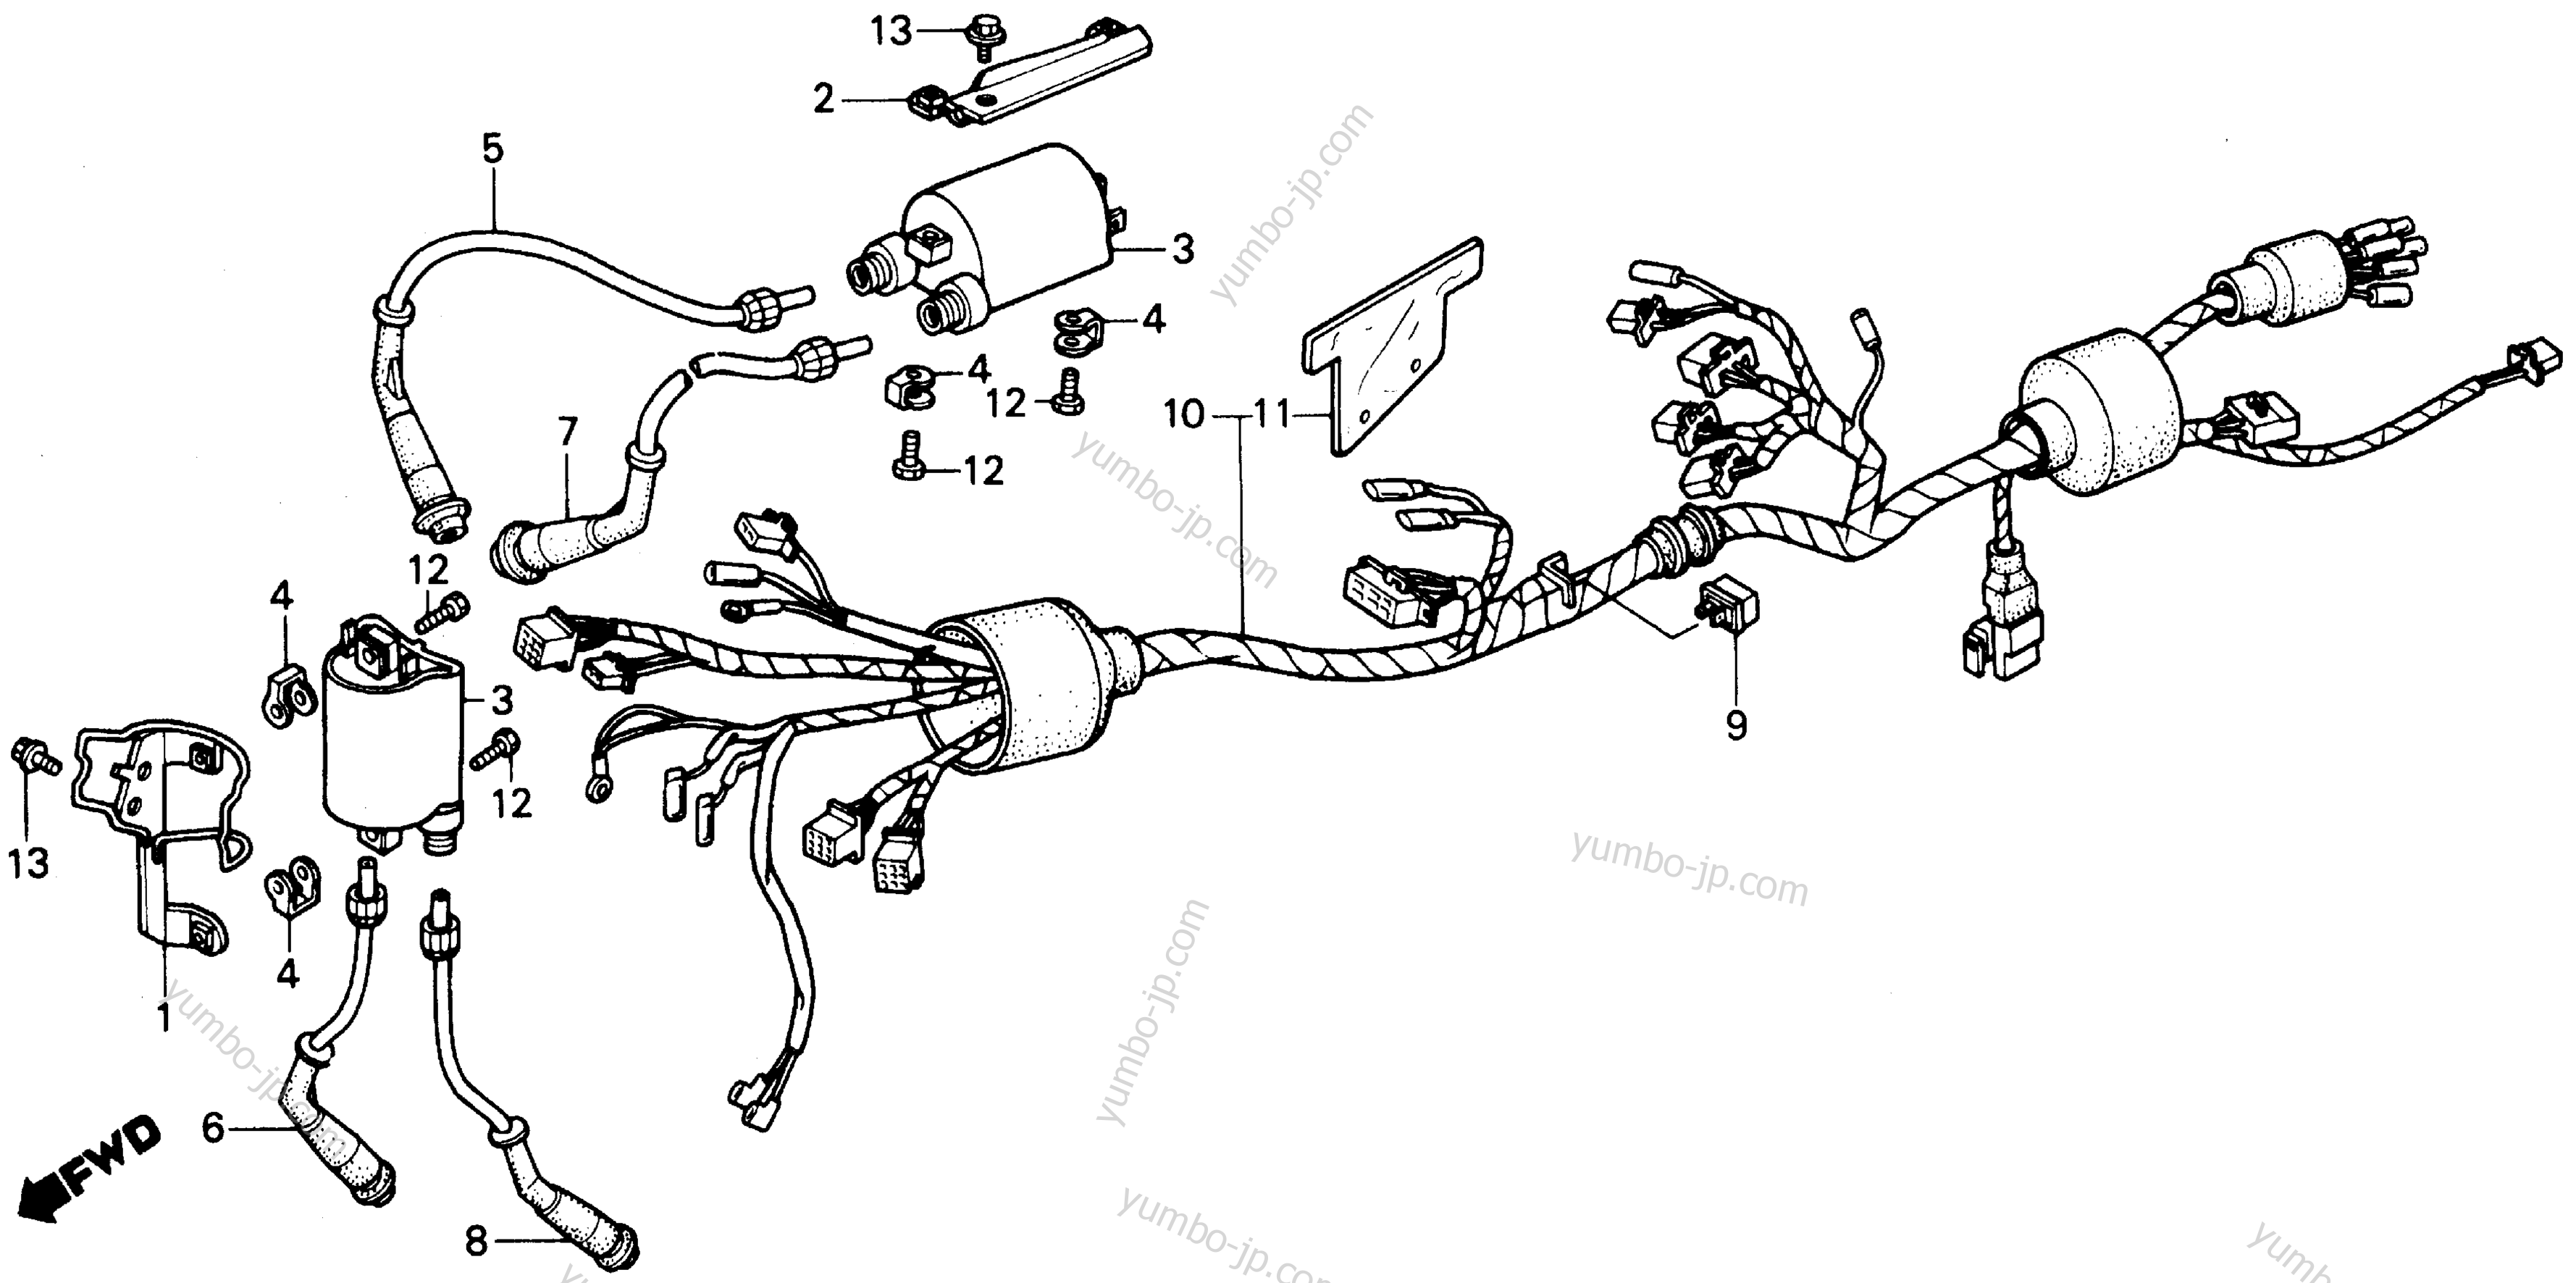 WIRE HARNESS for motorcycles HONDA VF700C AC 1987 year